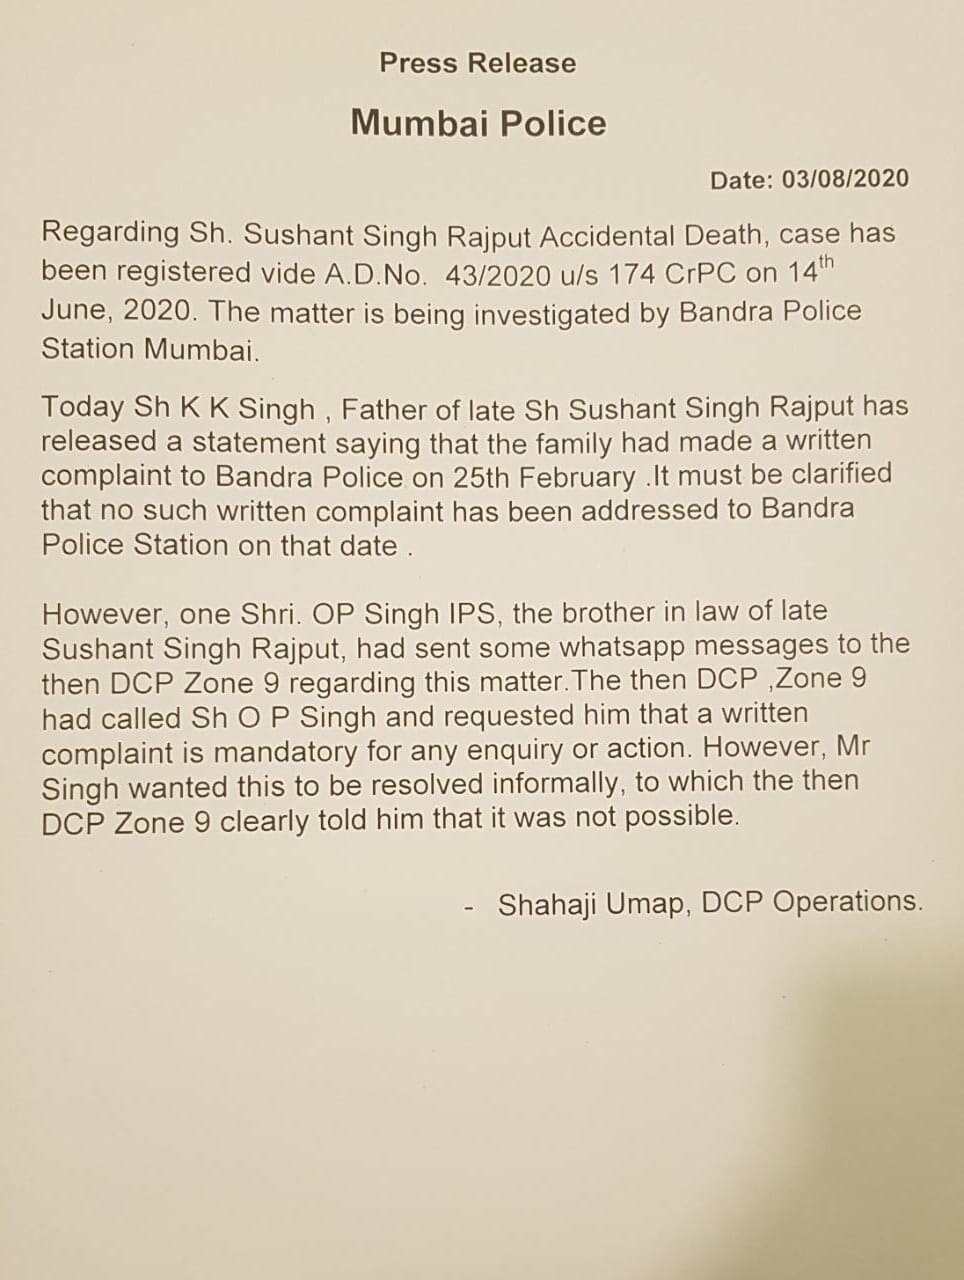 Mumbai Police Releases Official Statement Saying No Written Complaint Was Filed By Sushant Singh Rajput's Family In February; Check Out!